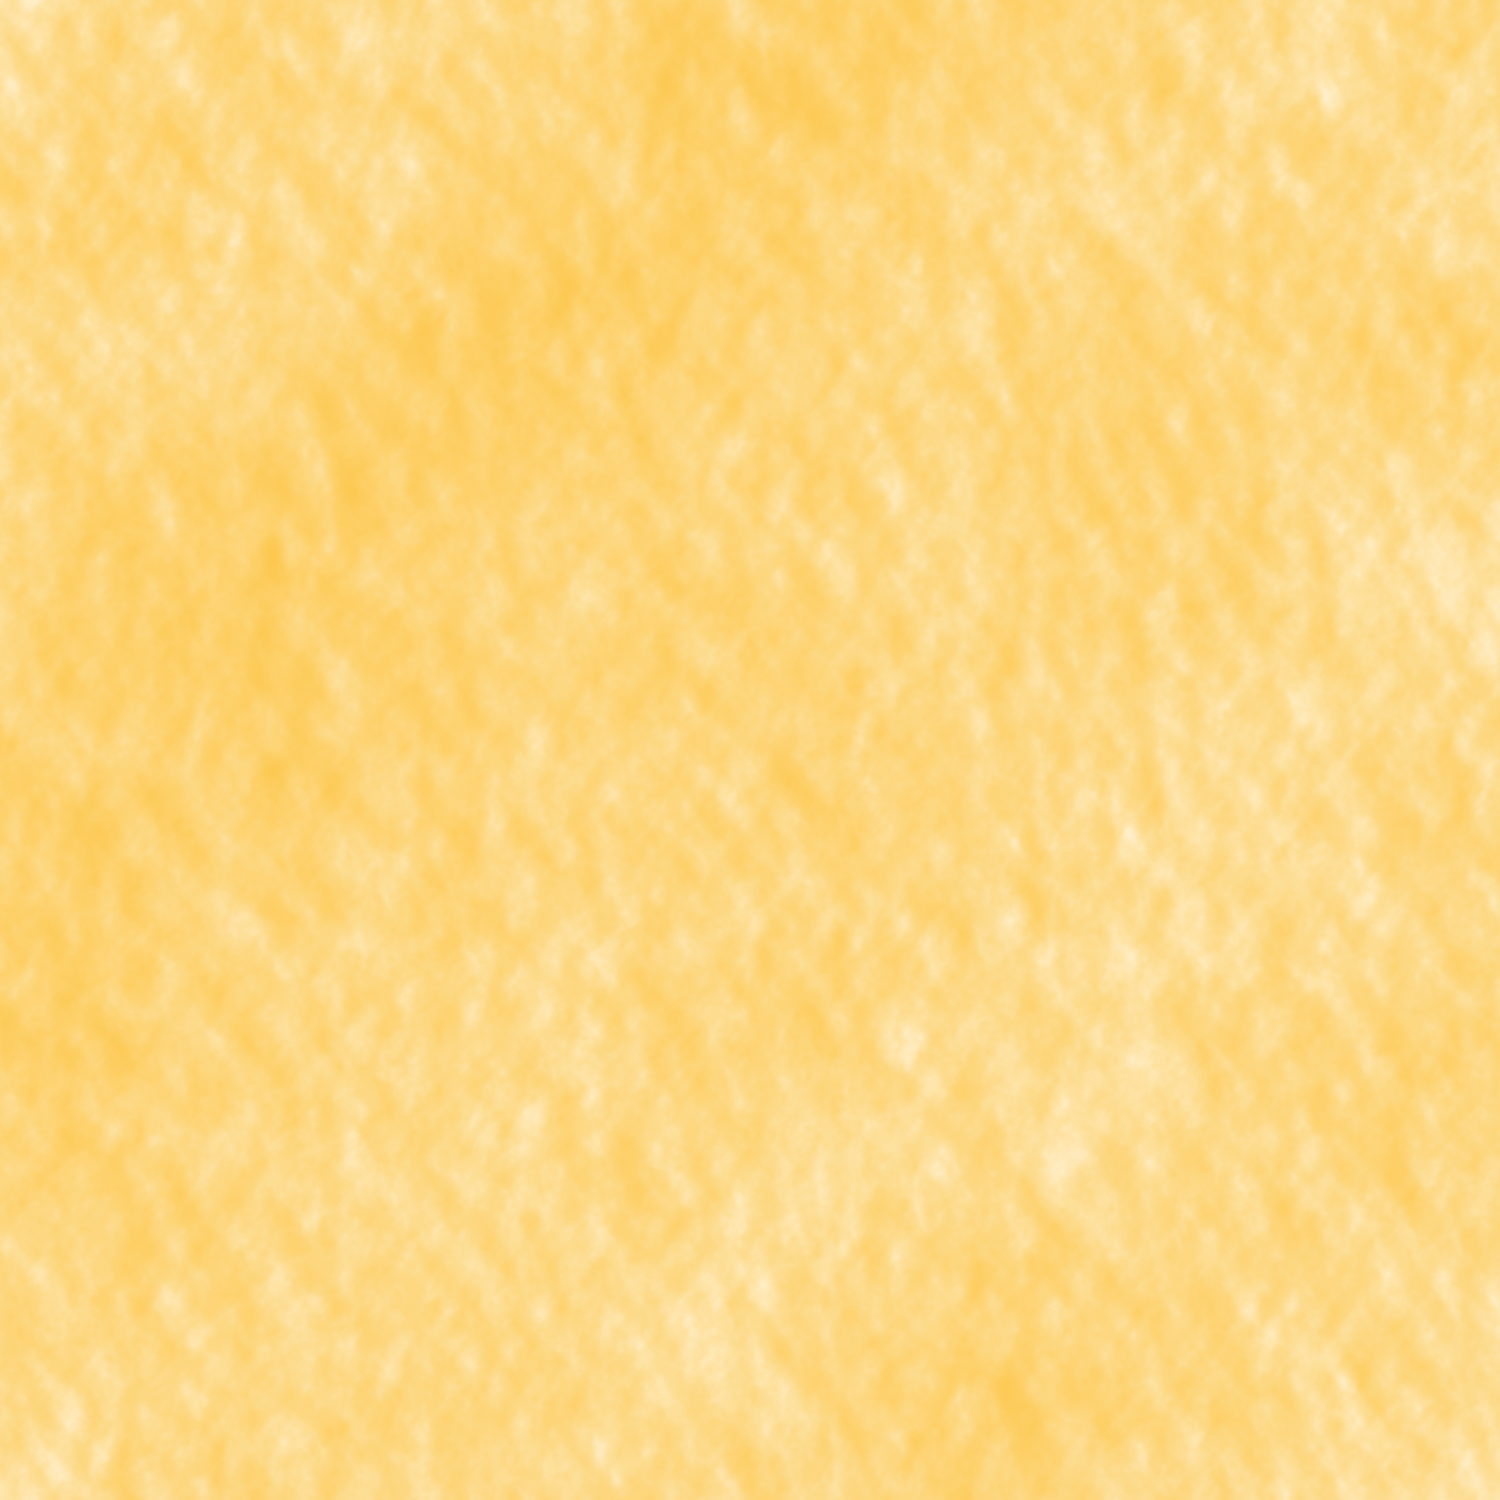 Yellow Textured Square Background 